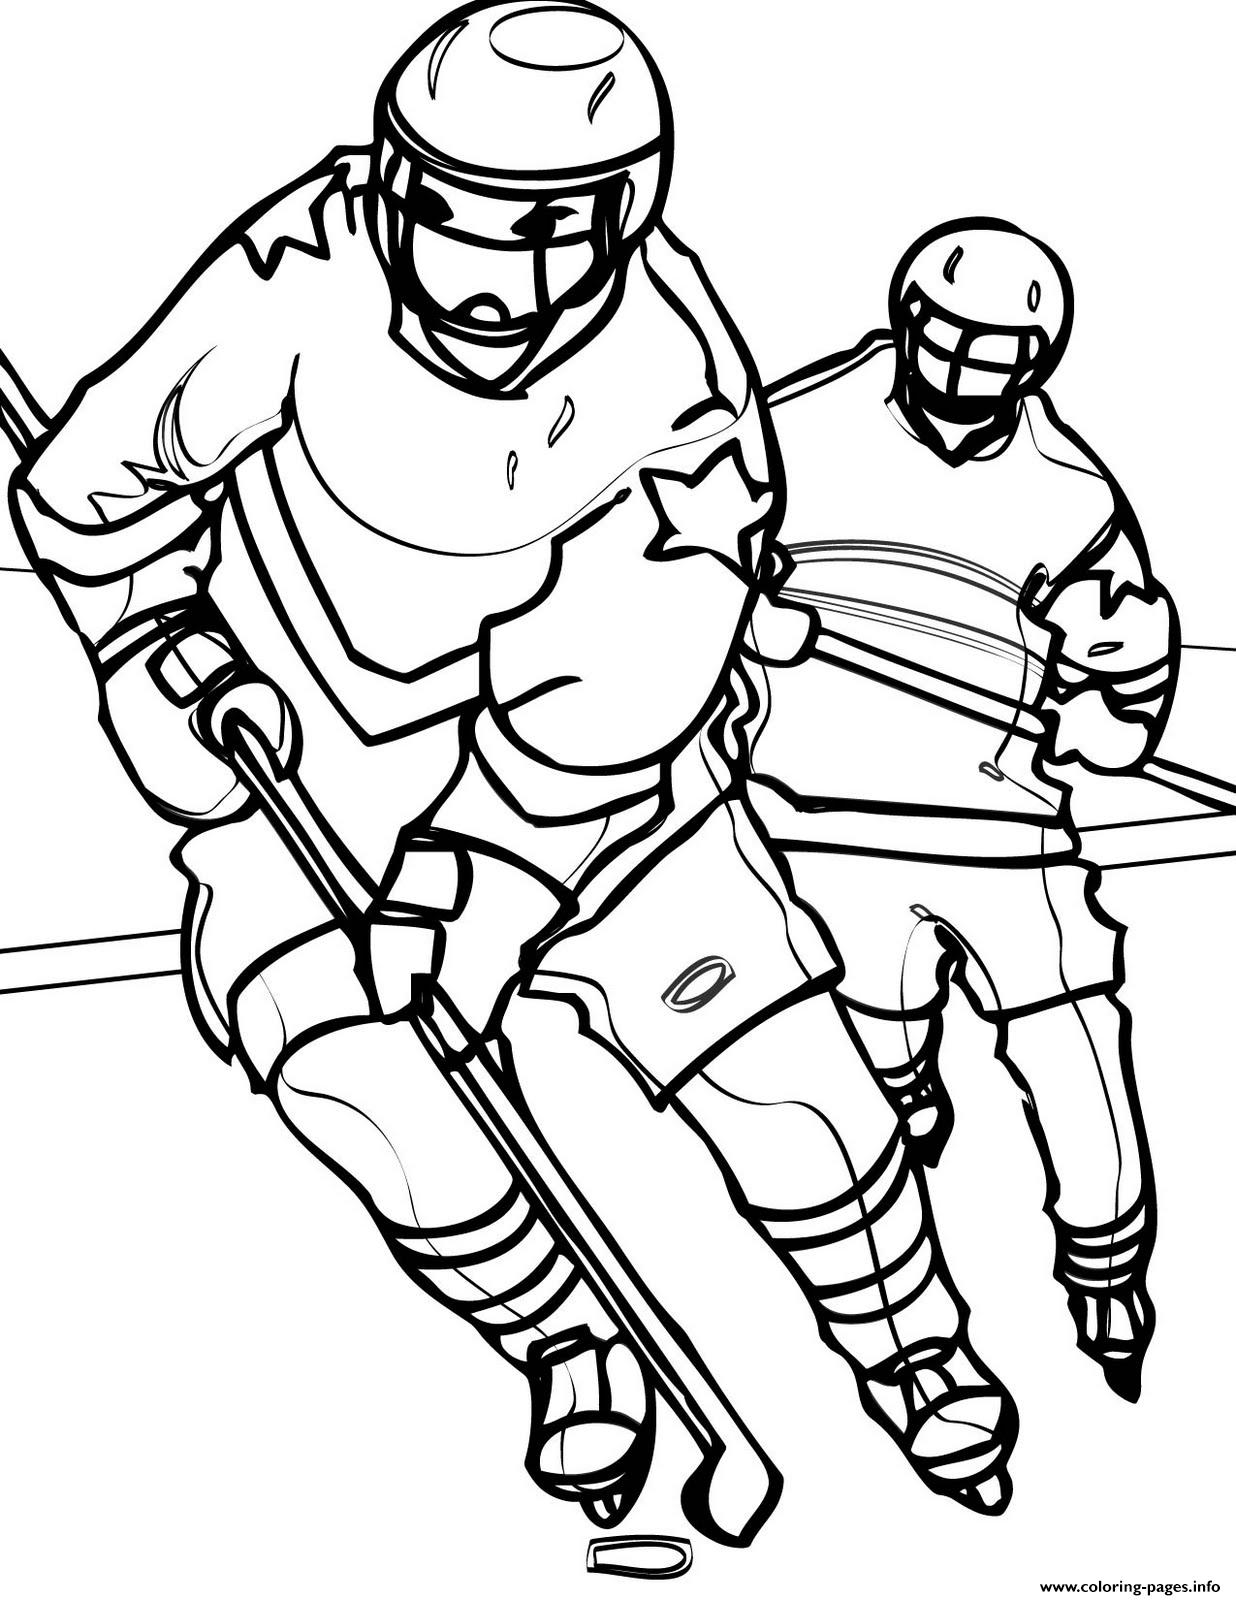 Playing Hockey S5eaf coloring